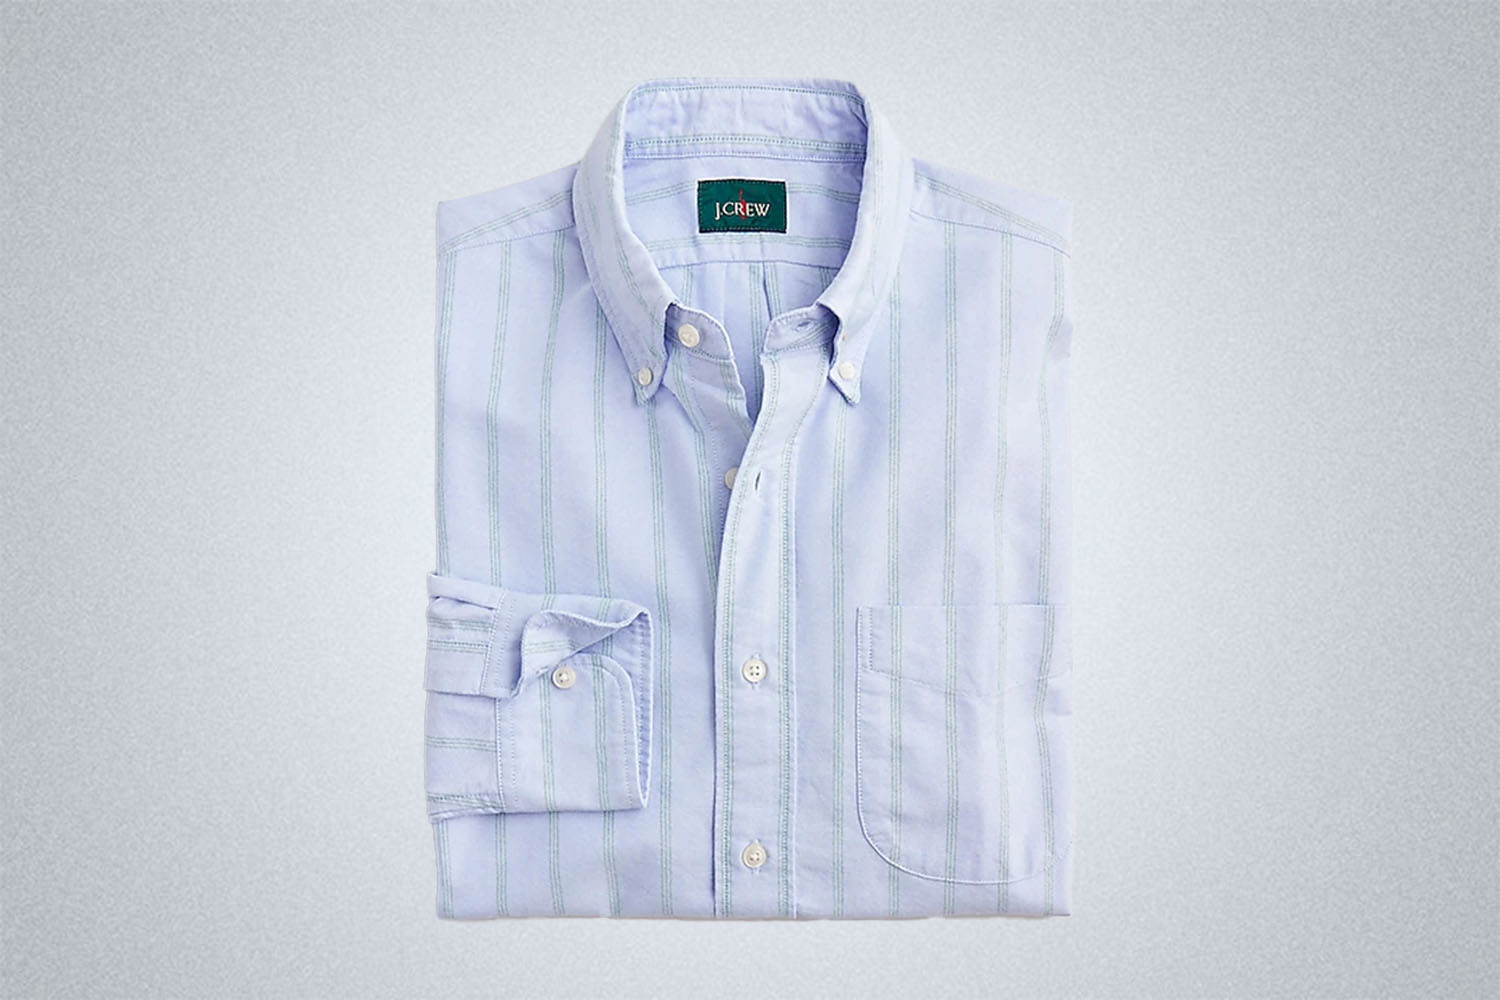 The Oversized Option: J.Crew Giant-Fit Oxford Shirt